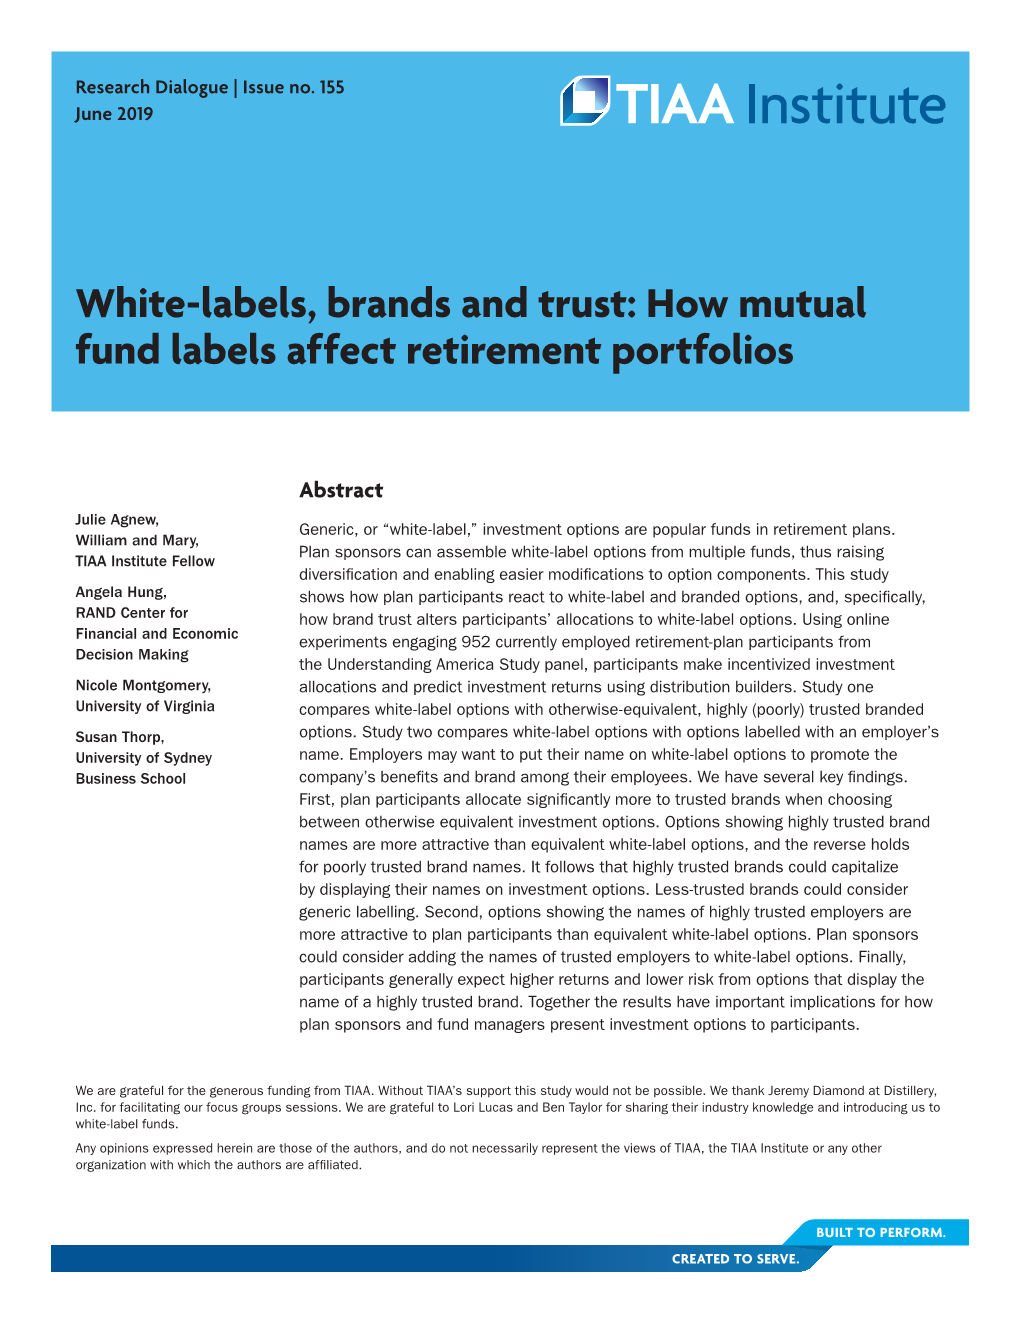 White-Labels, Brands and Trust: How Mutual Fund Labels Affect Retirement Portfolios